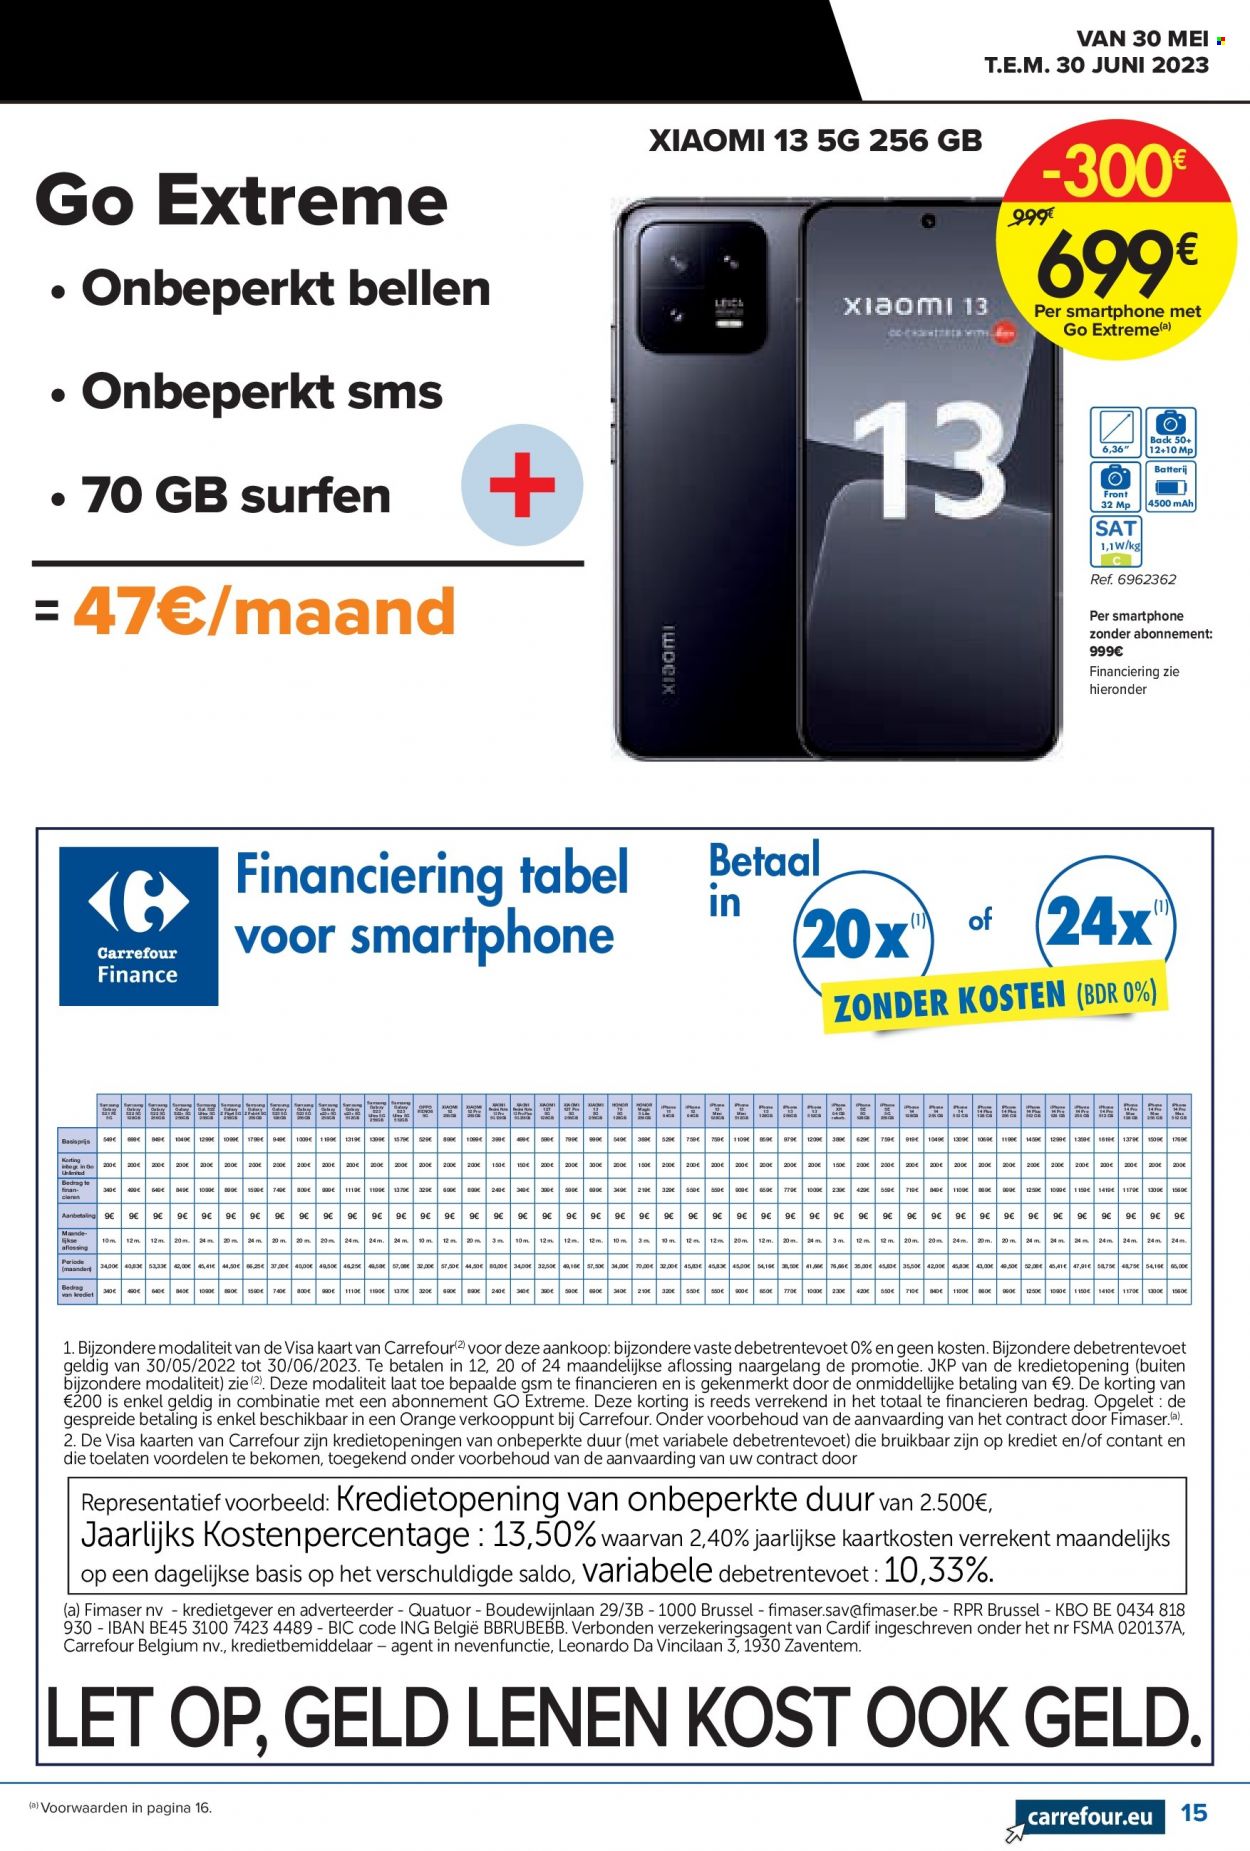 Catalogue Carrefour hypermarkt - 30.5.2023 - 30.6.2023. Page 15.